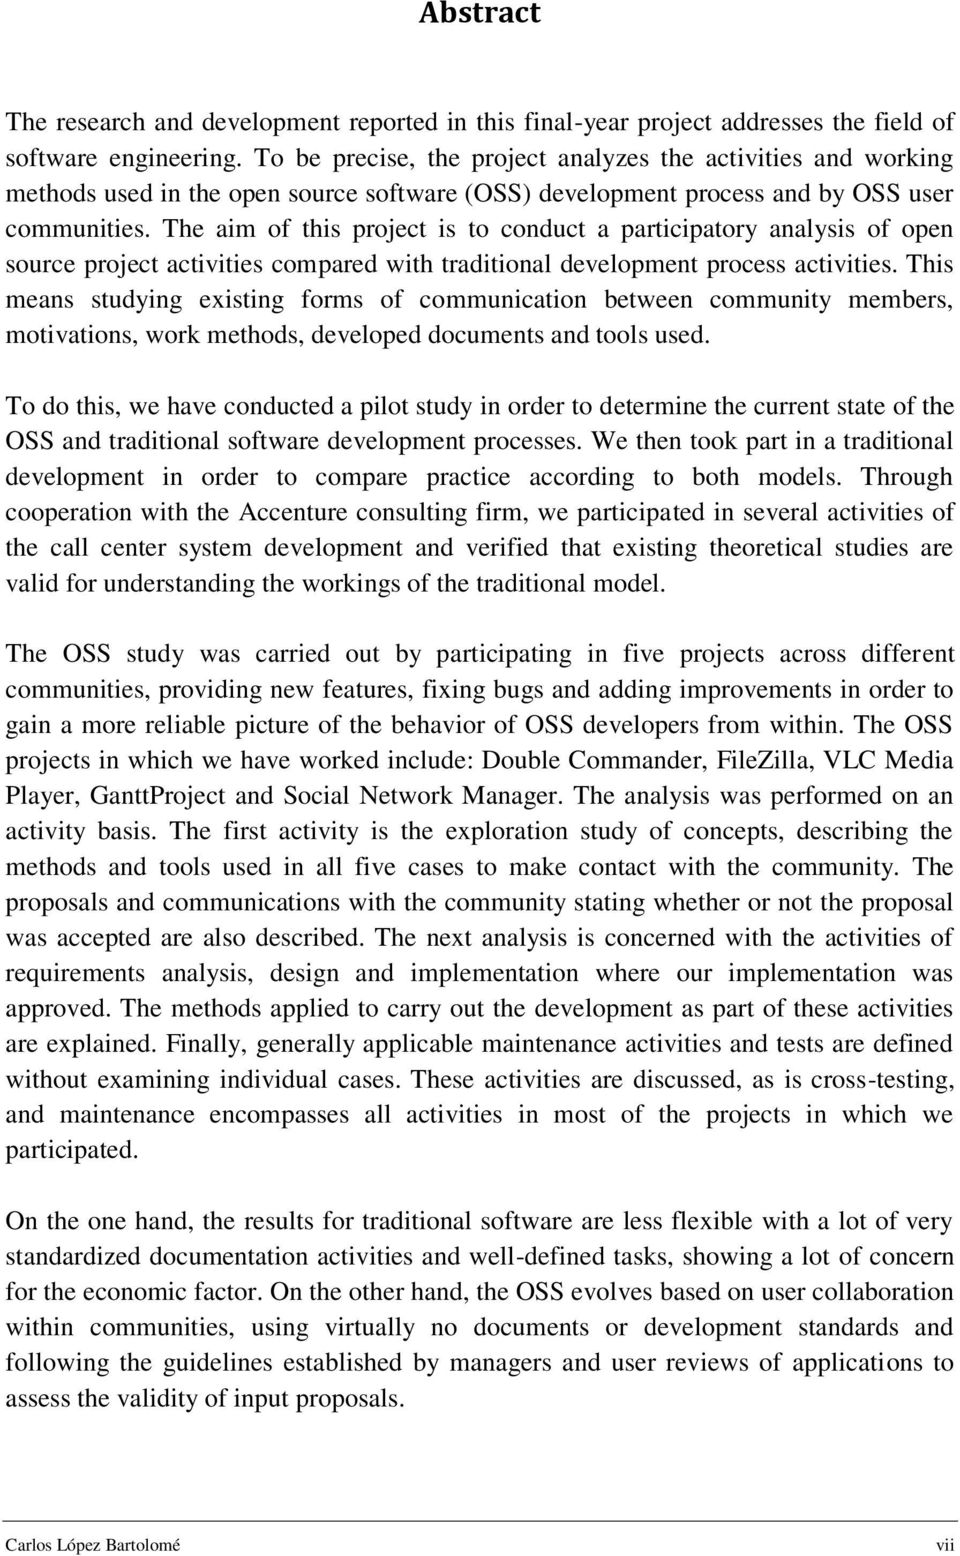 The aim of this project is to conduct a participatory analysis of open source project activities compared with traditional development process activities.